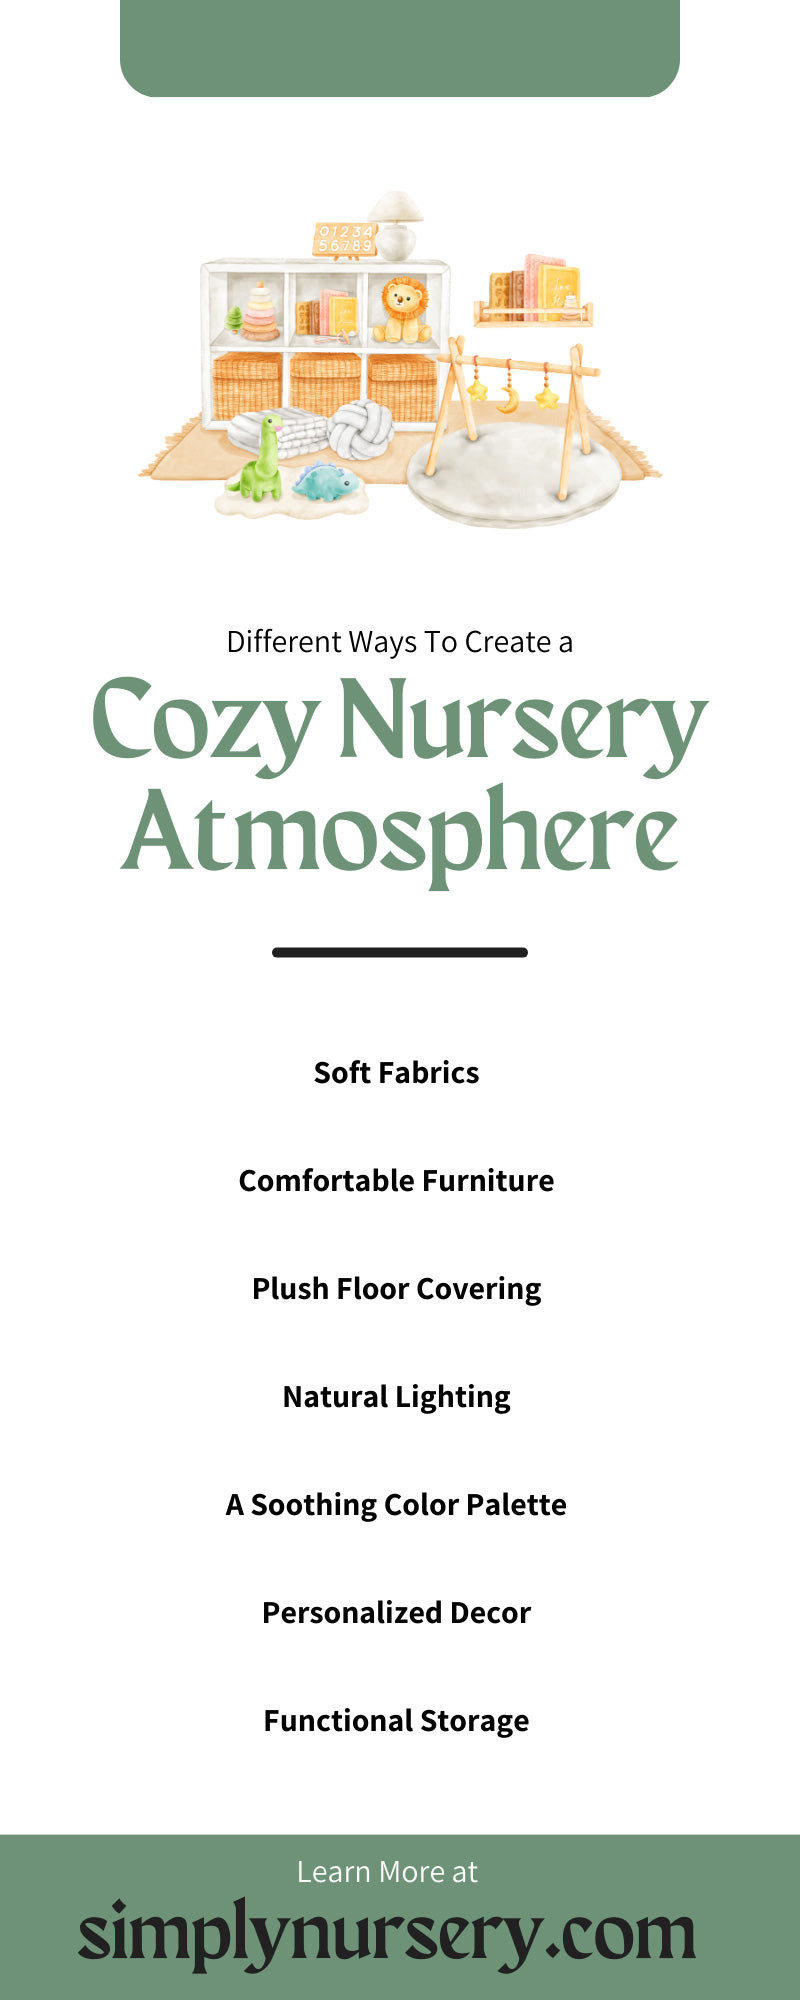 Different Ways To Create a Cozy Nursery Atmosphere